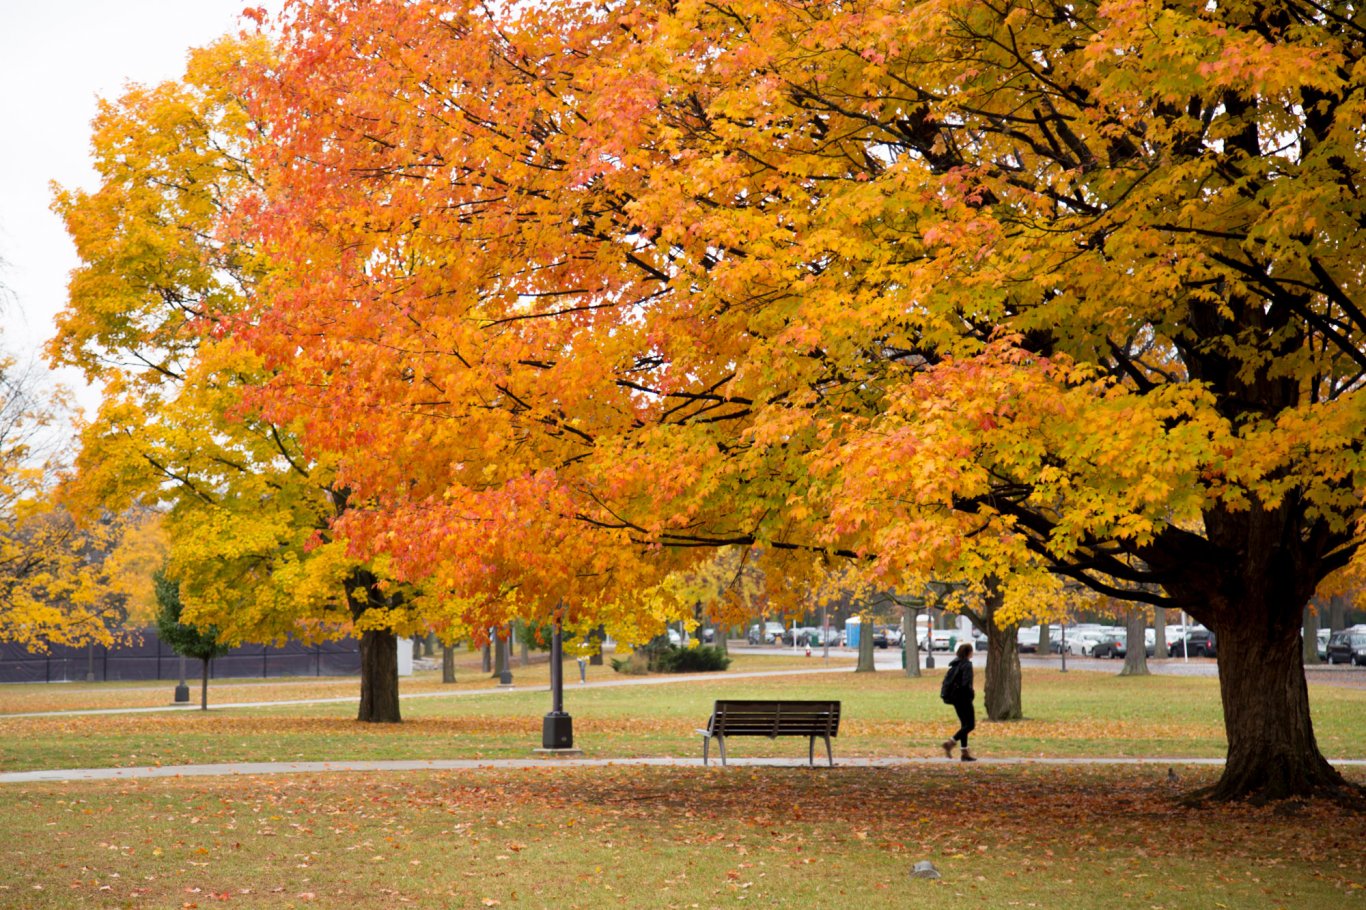 A student walks along a tree-lined Main Campus path as the leaves change color for fall.